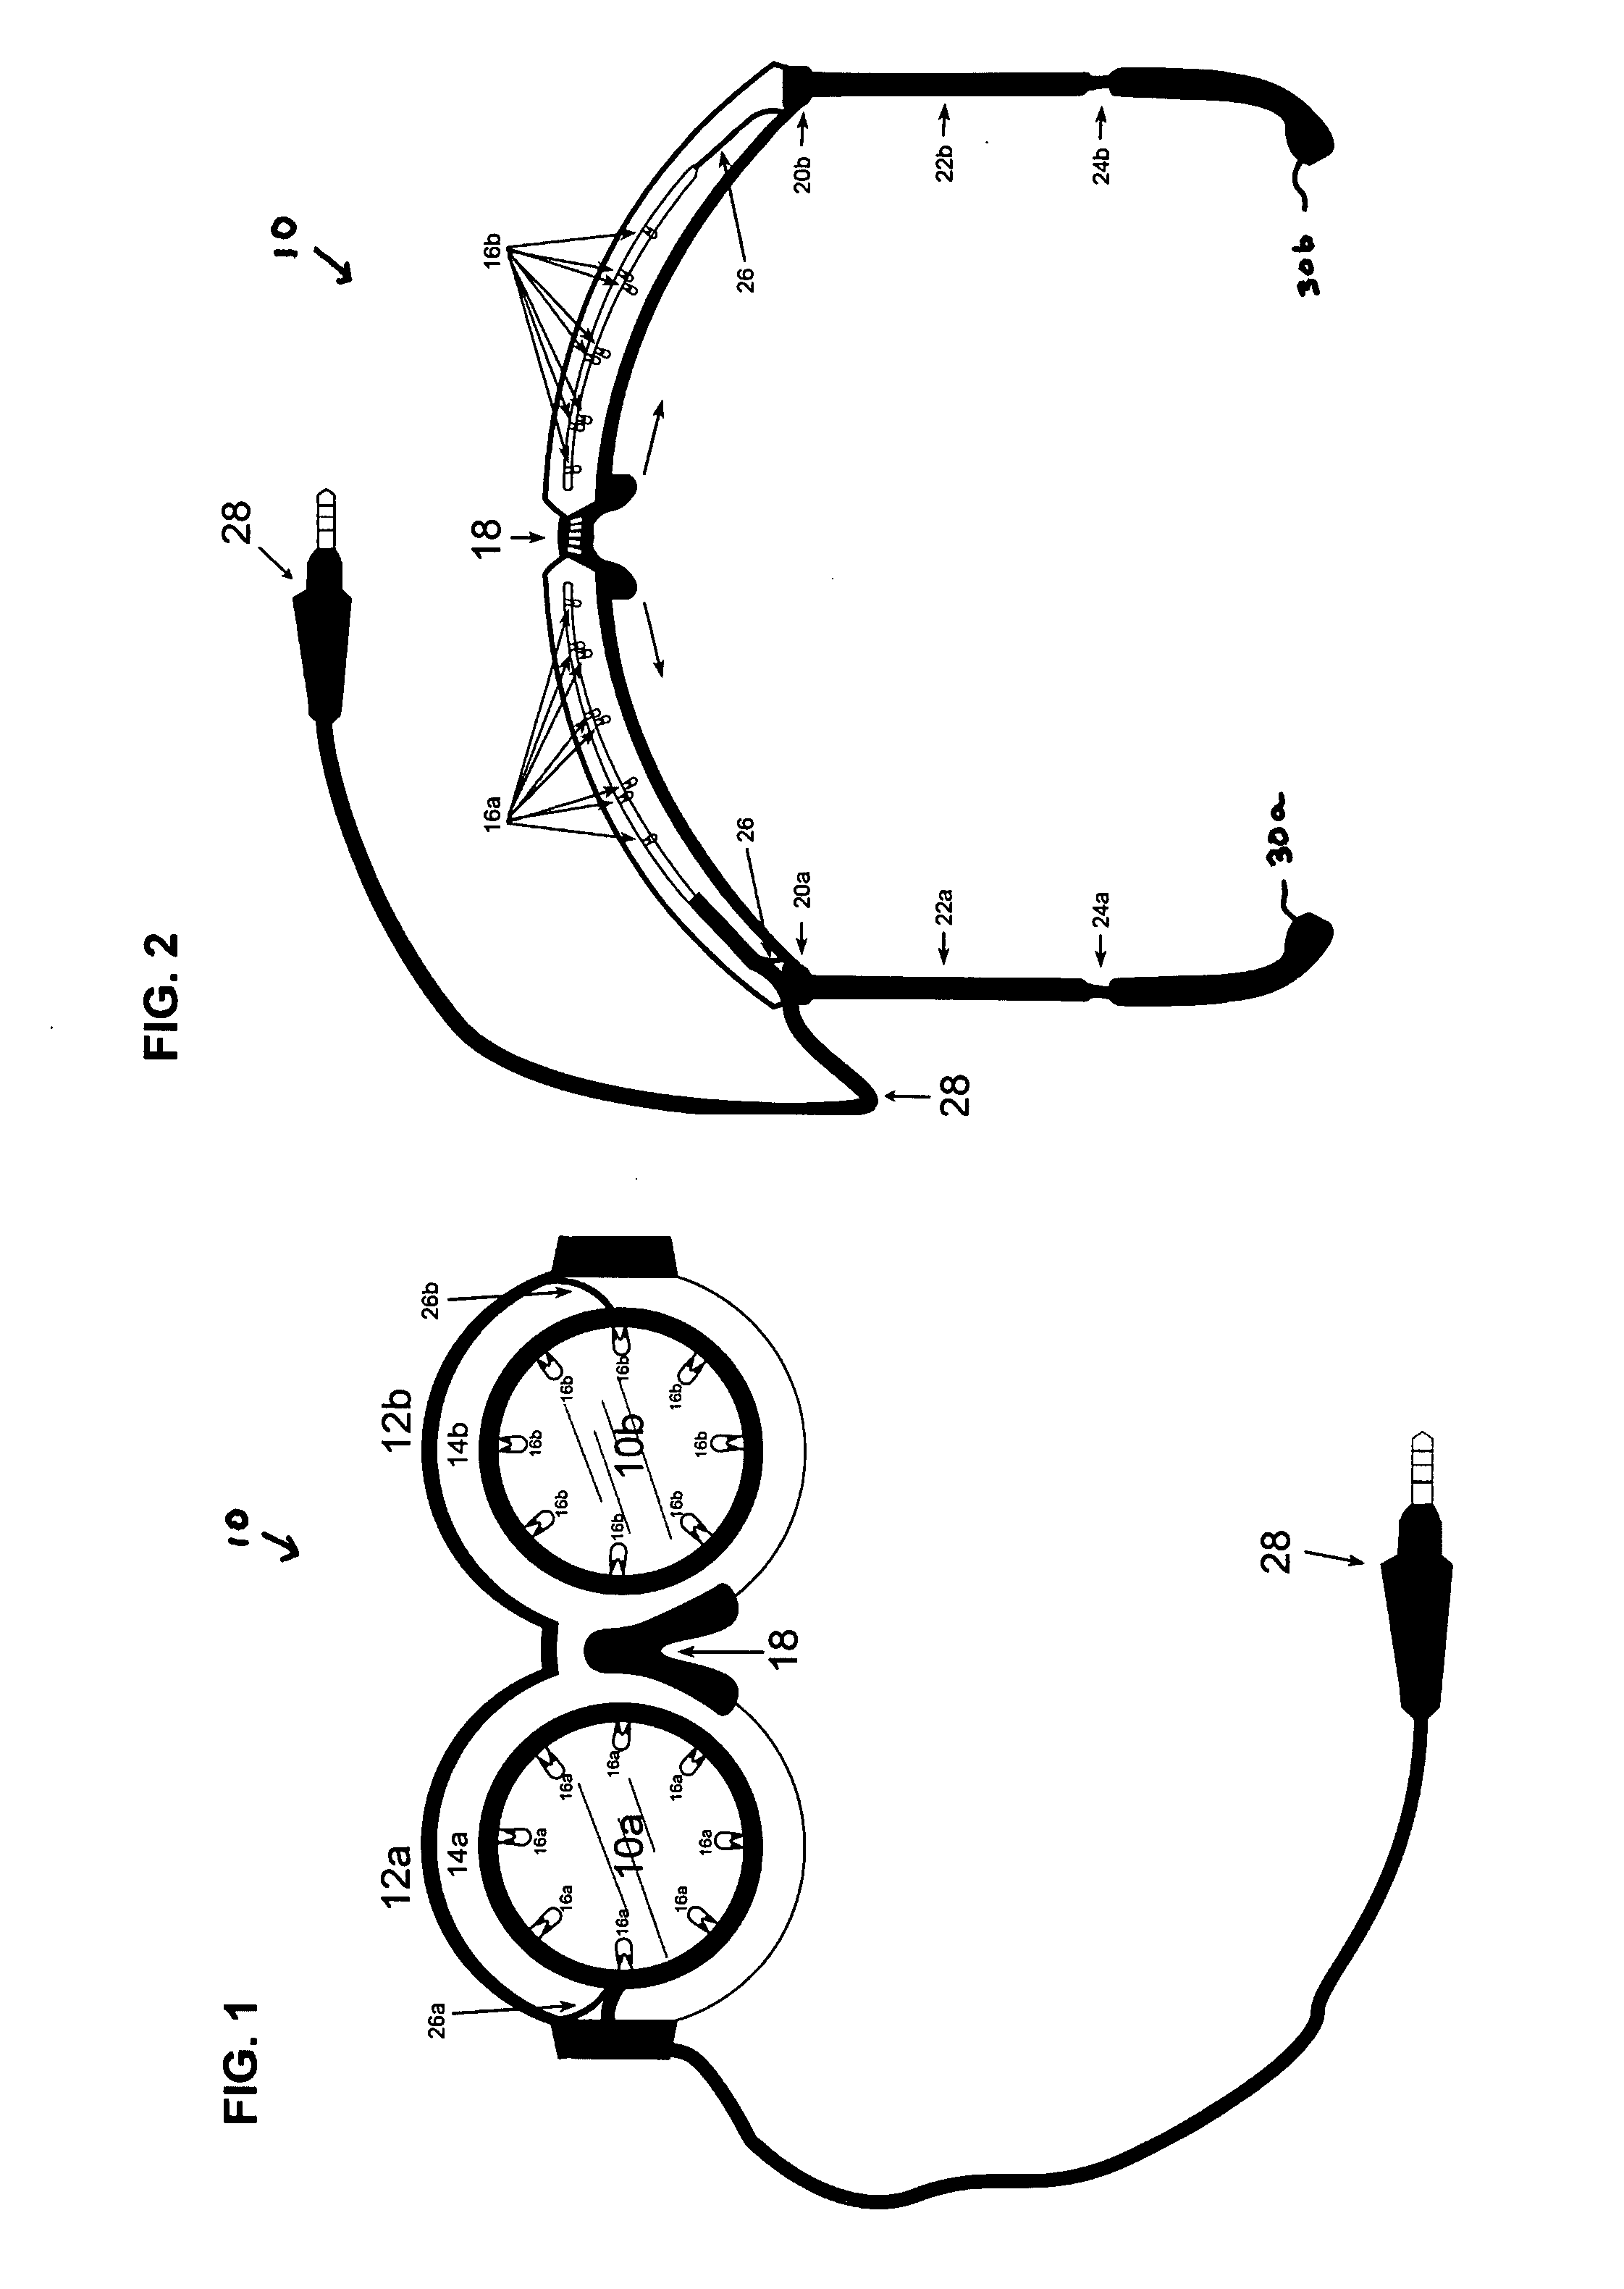 Method and apparatus for stimulating the neurochemistry of the brain resulting in increased overall brain function, cognitive performance, and intelligence quota